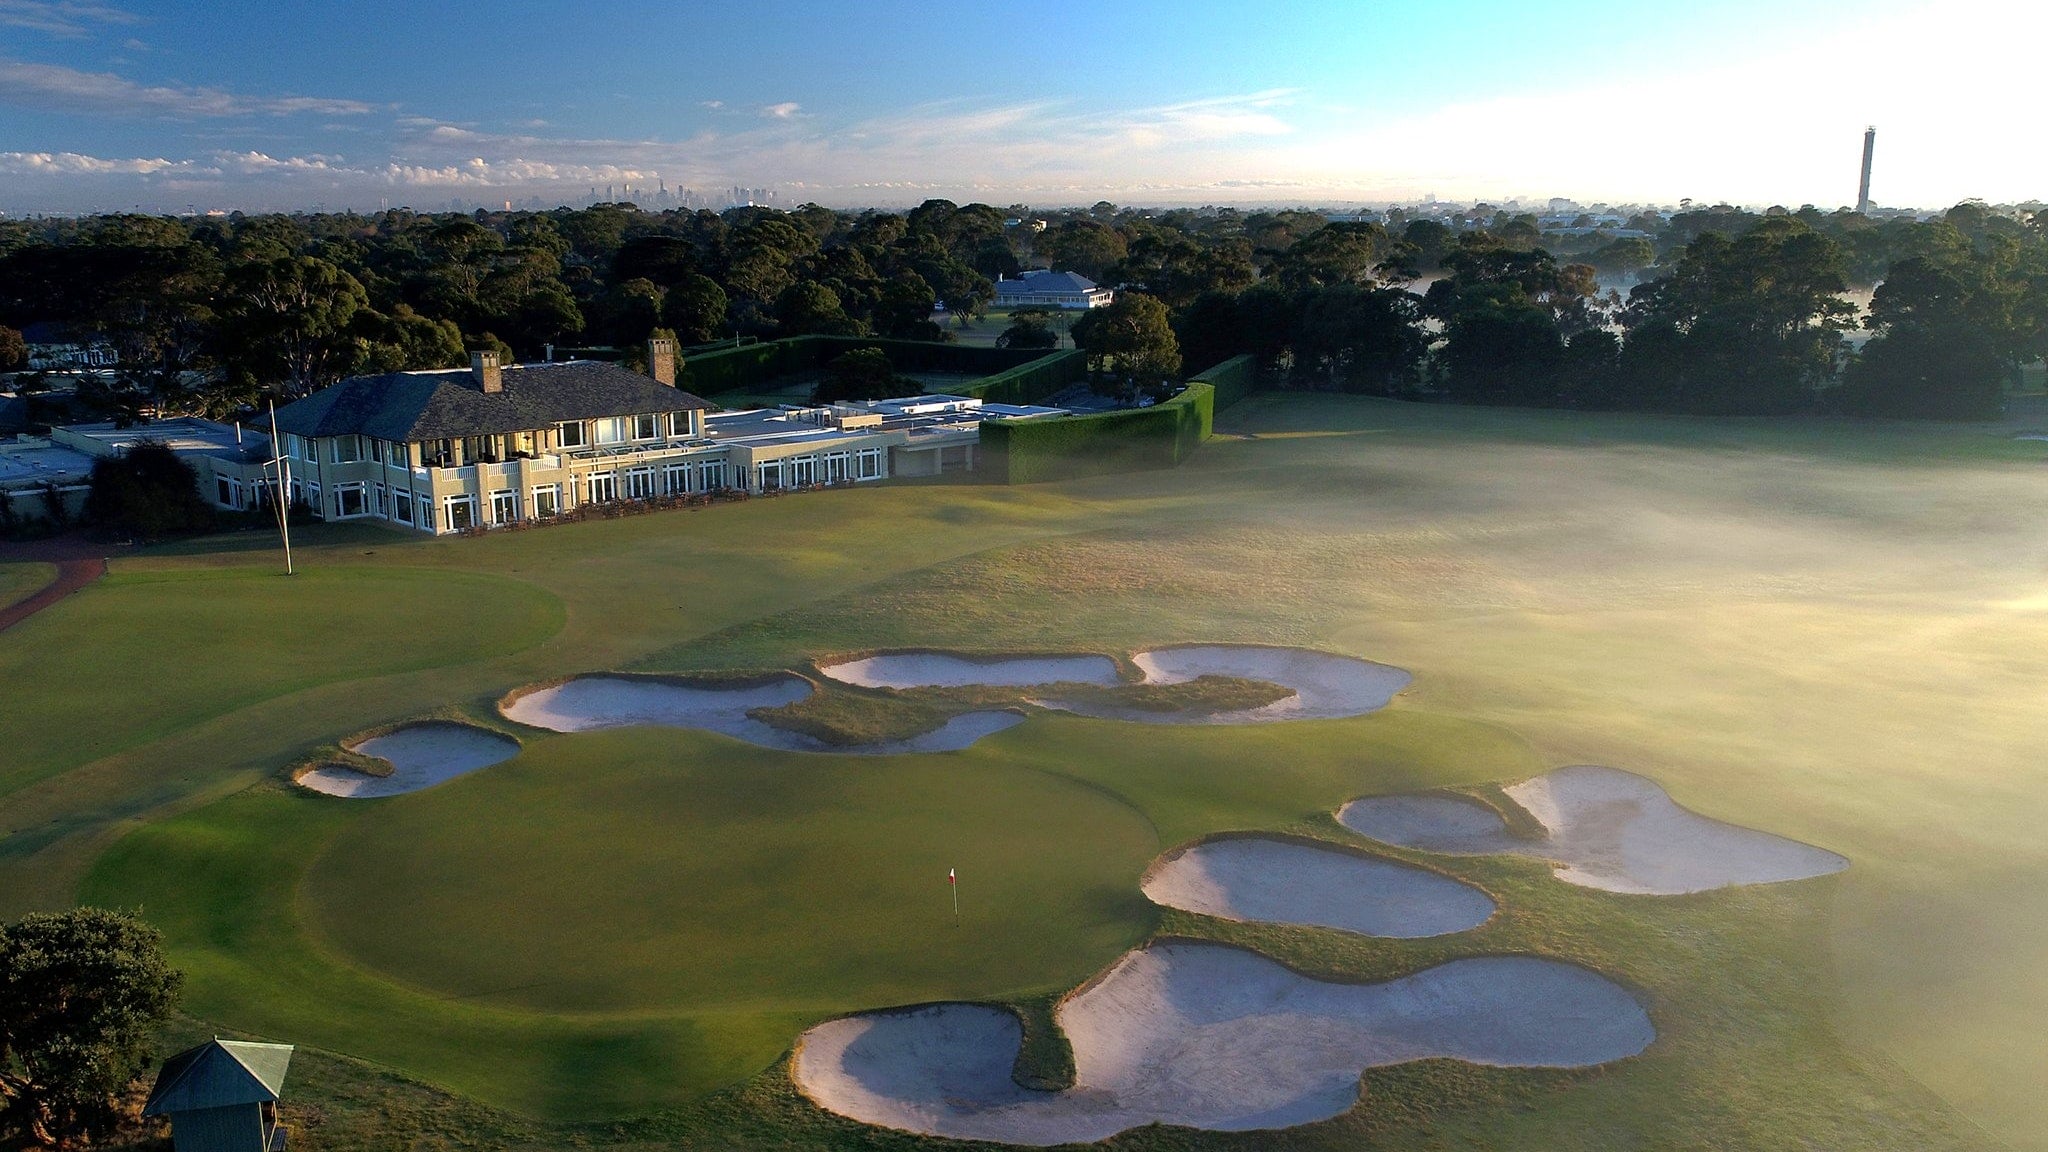 The distant city is seen from above with Royal Melbourne golf clubhouse in the foreground